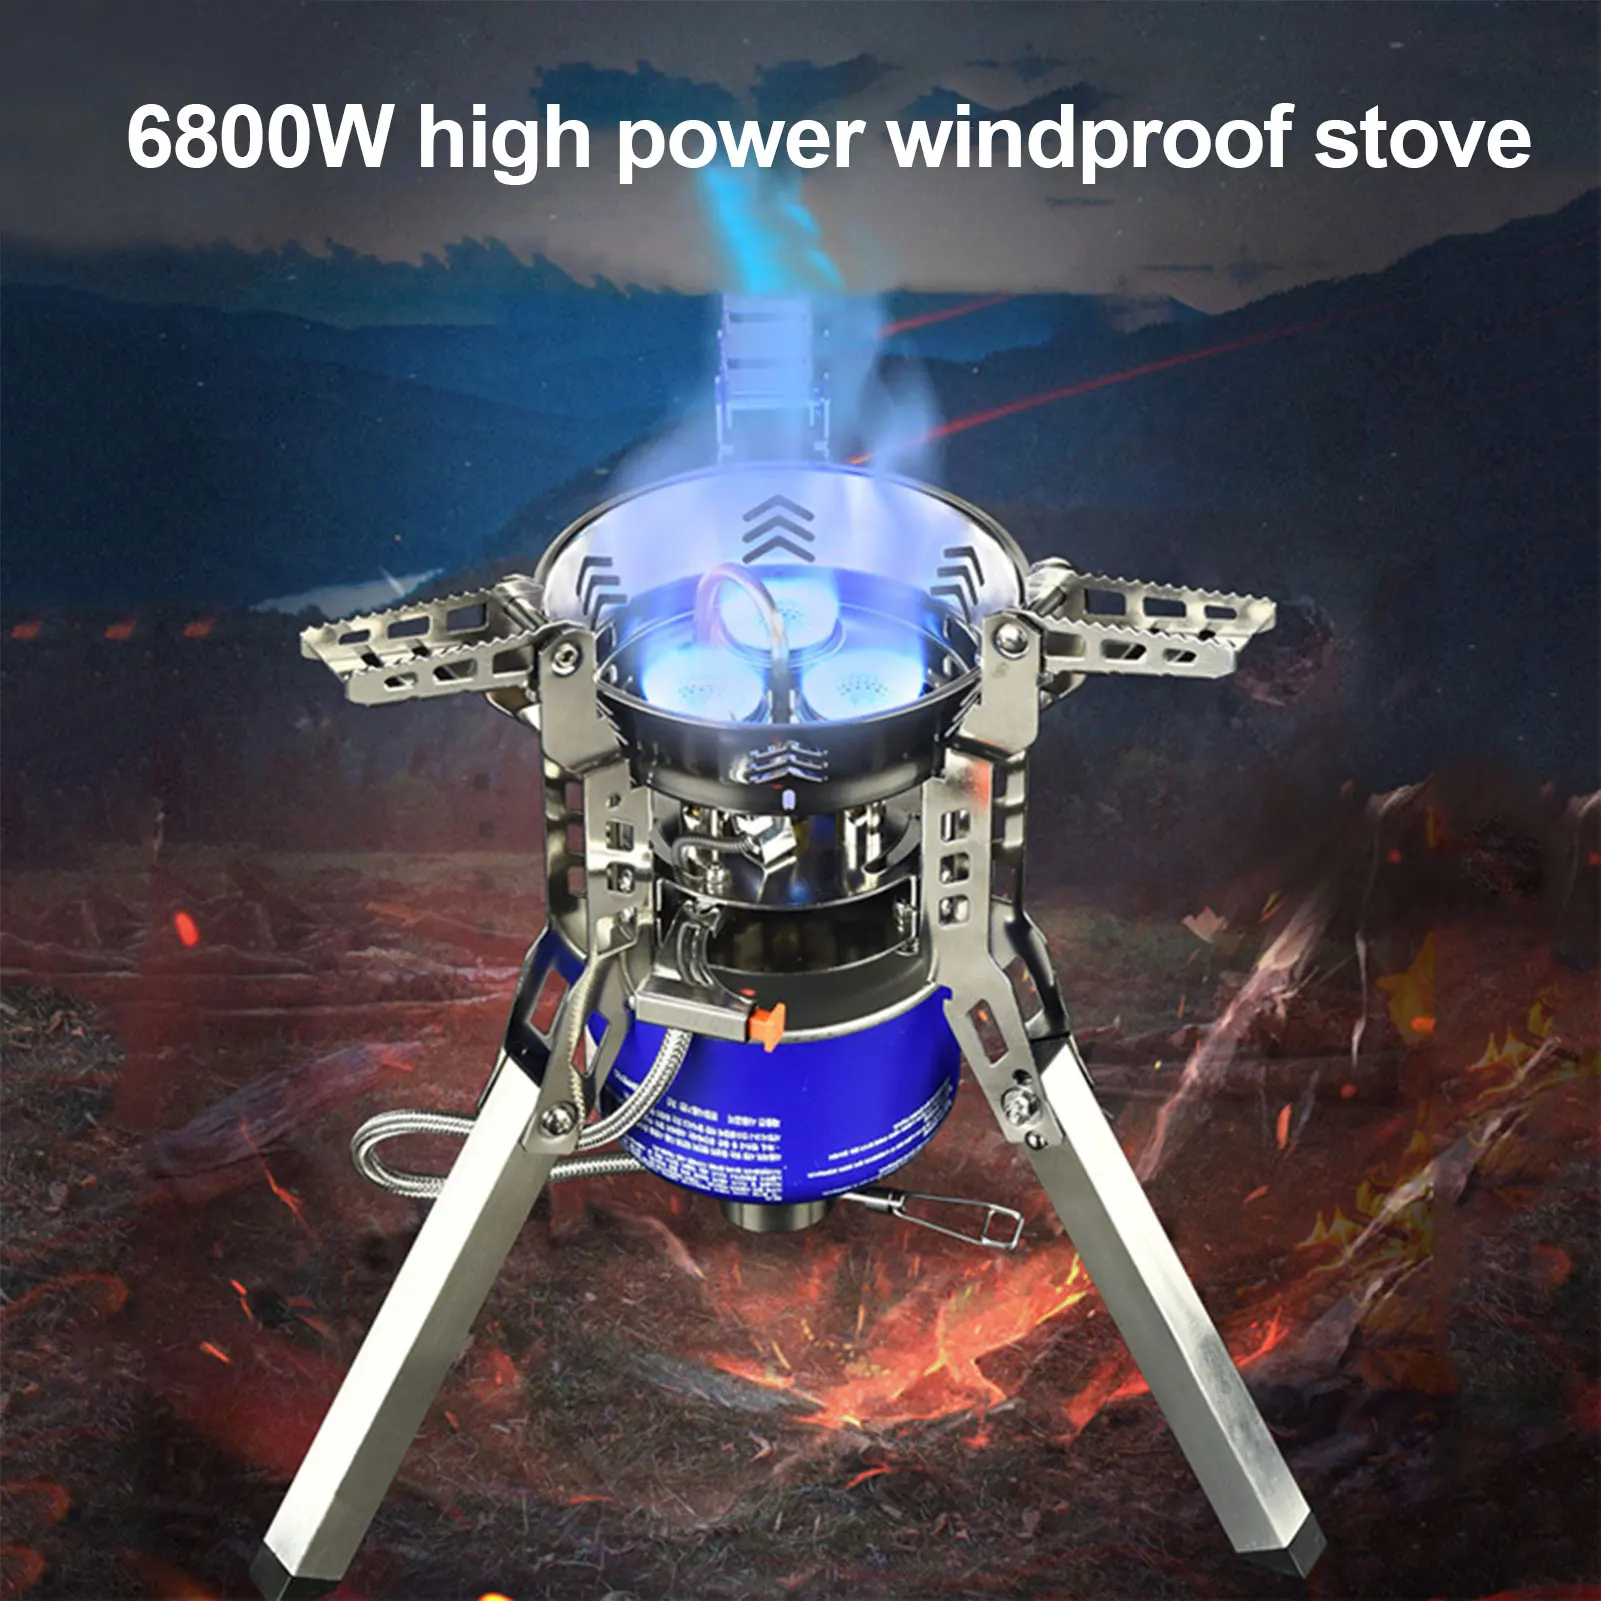 Windproof Camping Gas Stove Outdoor Camping Foldable Burner Burner Camping Stove Gas Strong Cookware Supplies Fire